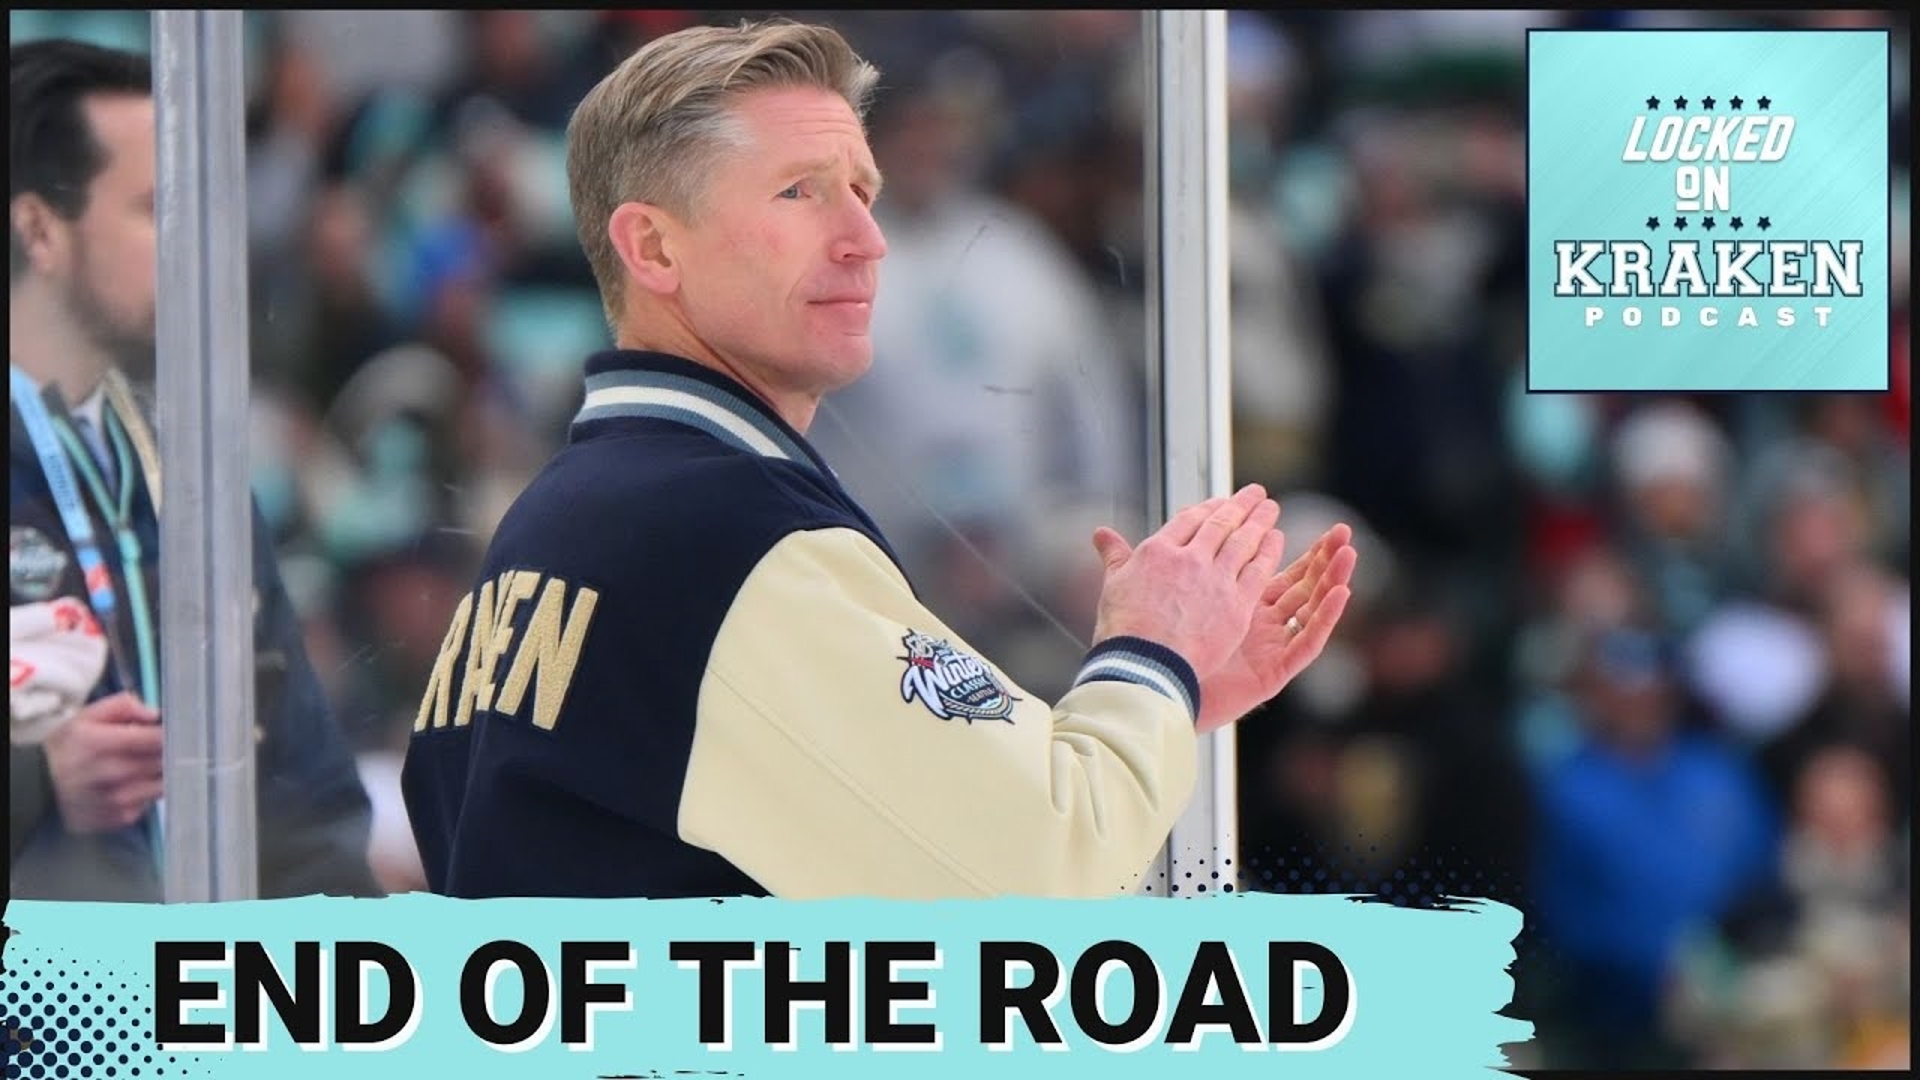 Locked on Kraken host Erica L. Ayala discusses Hakstol news, including conflicting reports about Dave losing the locker room.